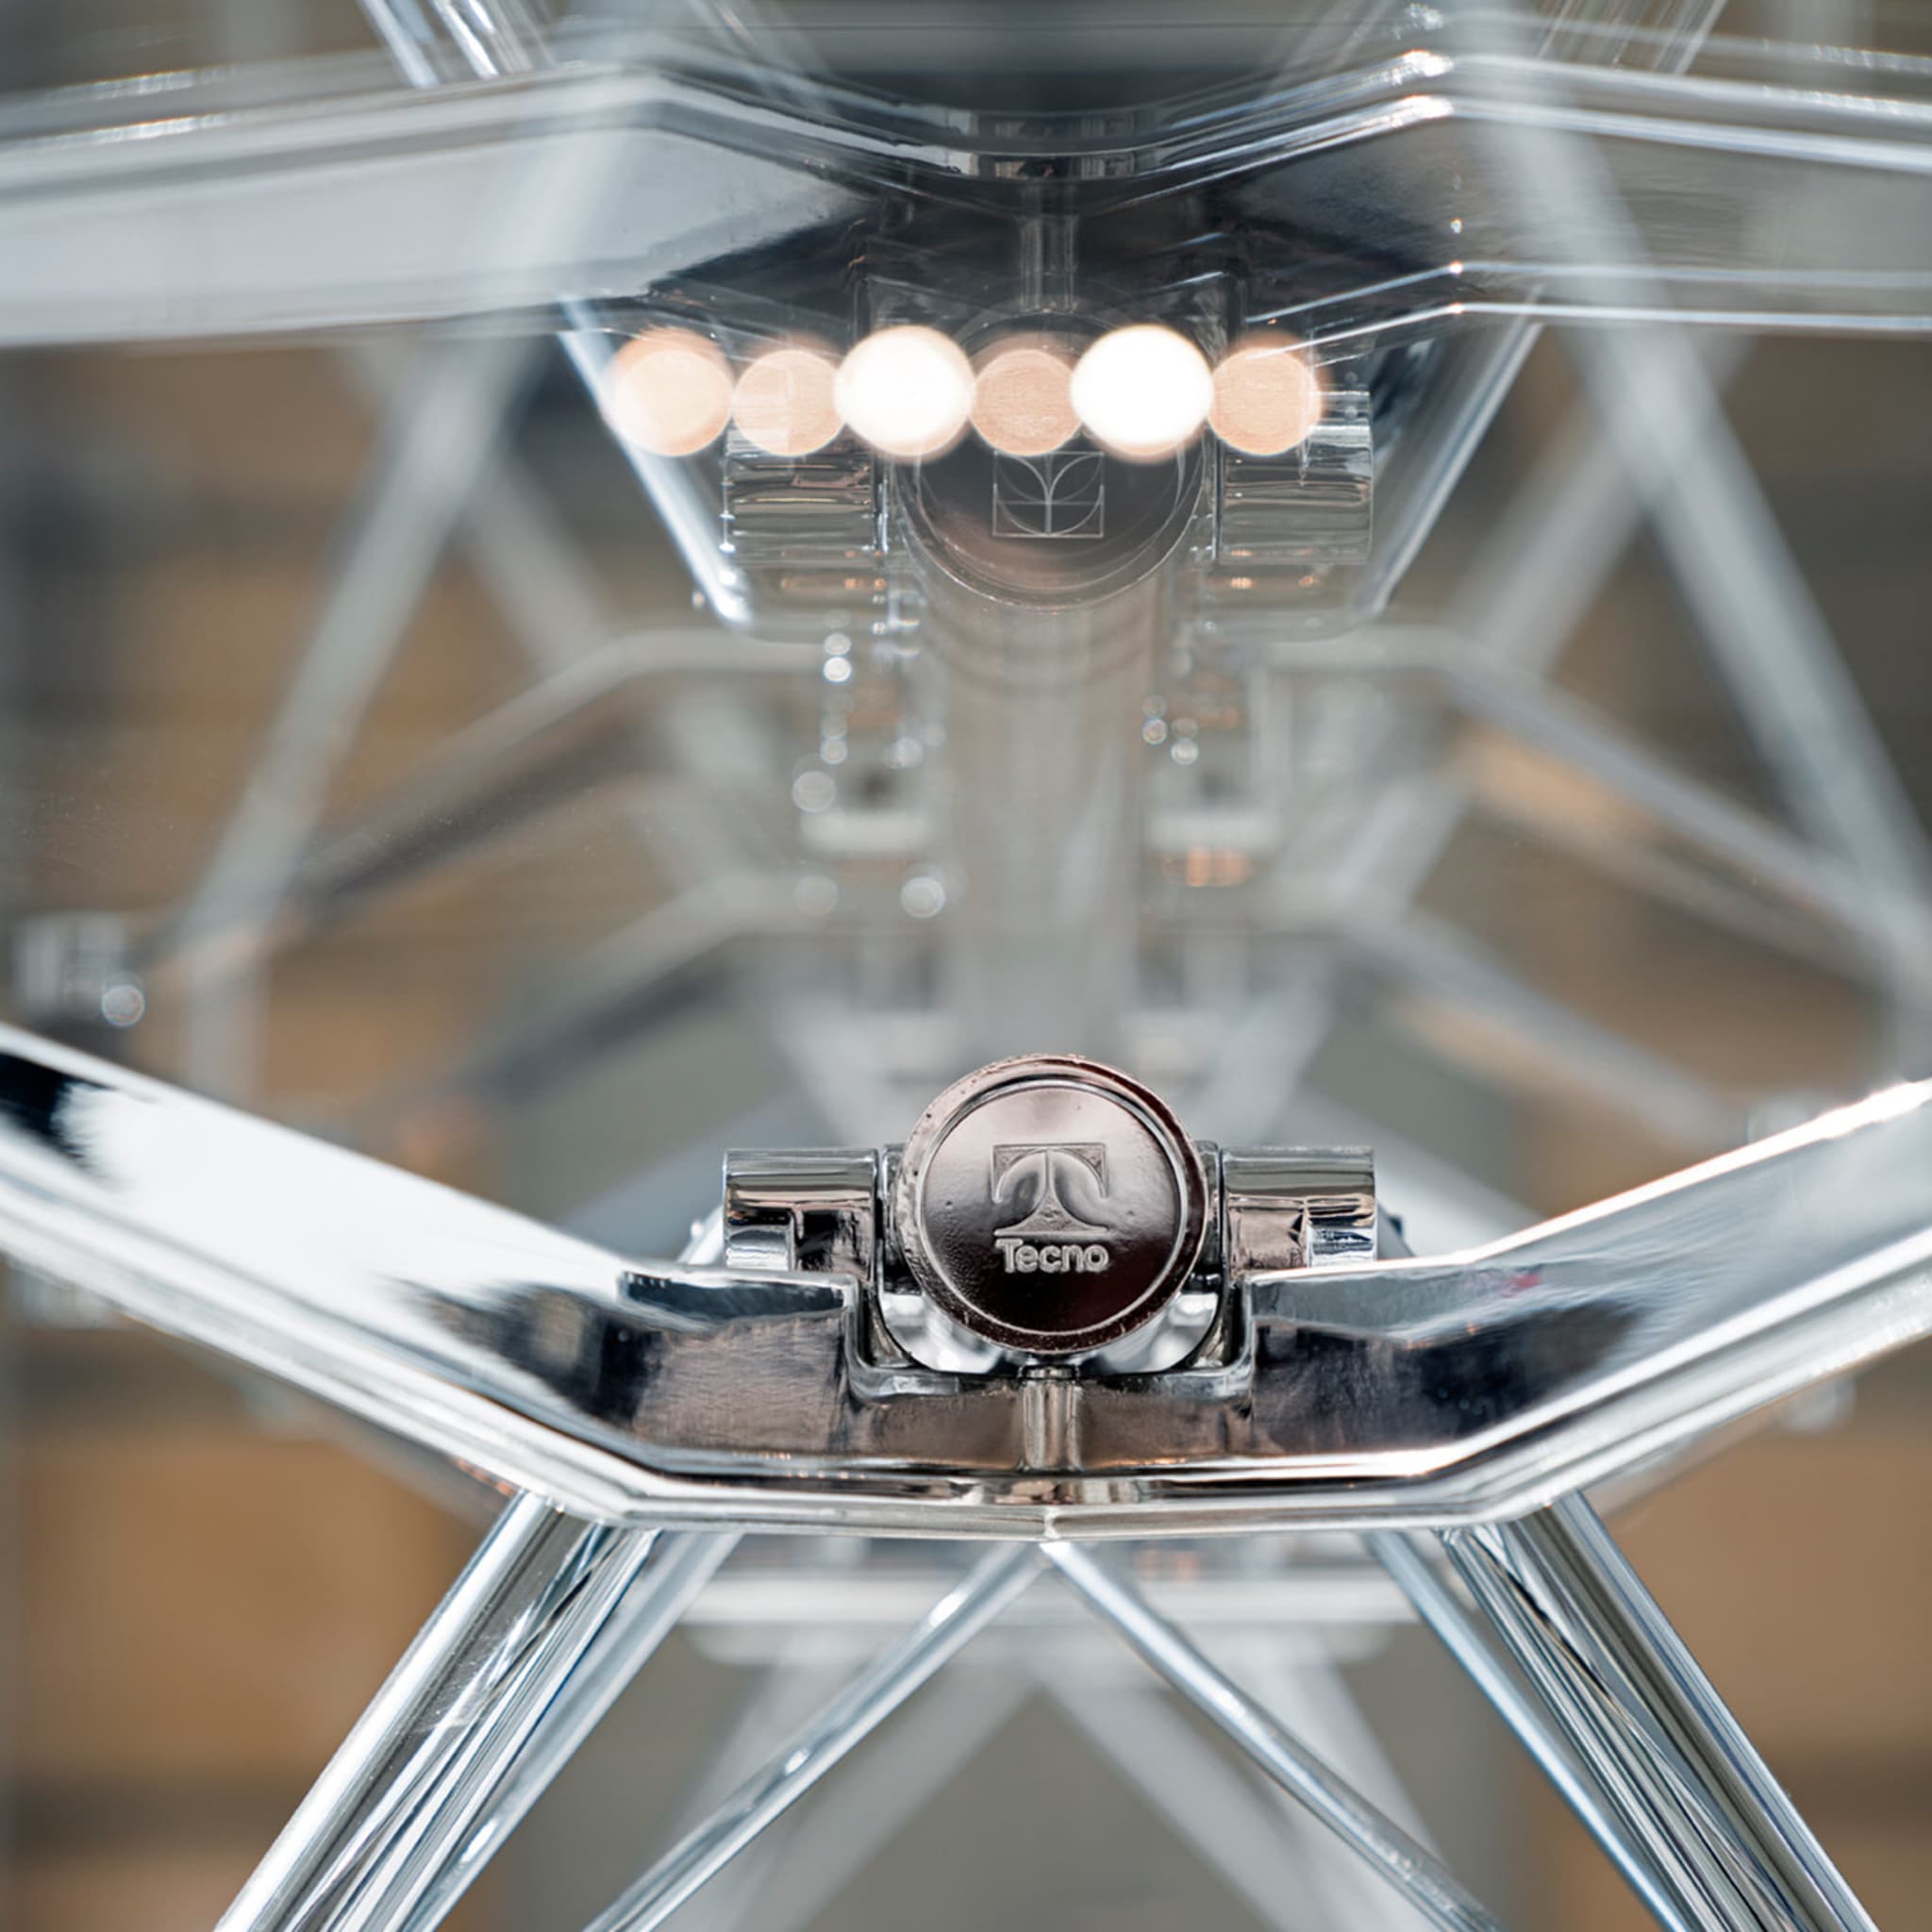 Nomos Chrome Table by Norman Foster - Alternative view 2